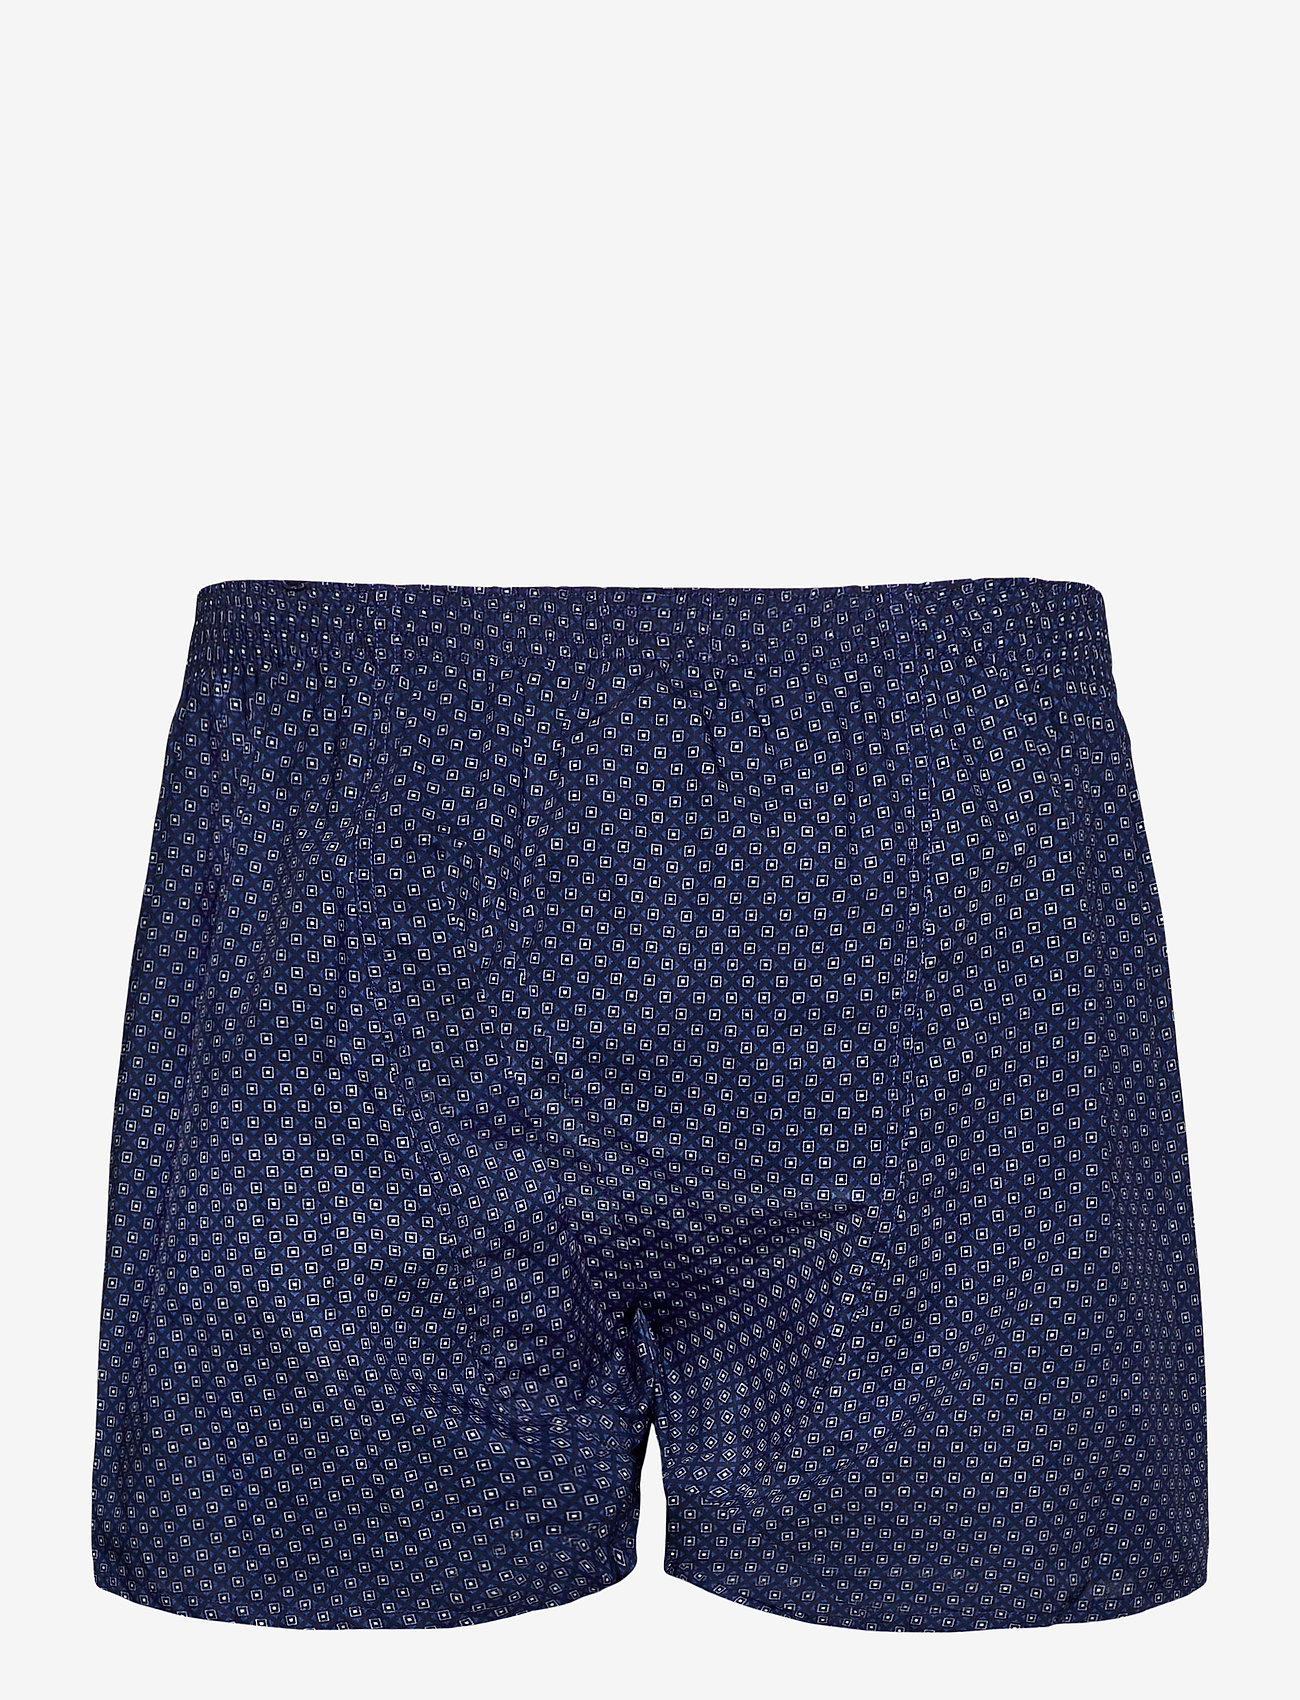 Jockey - Boxer woven 1-p - lowest prices - maritime blue - 1